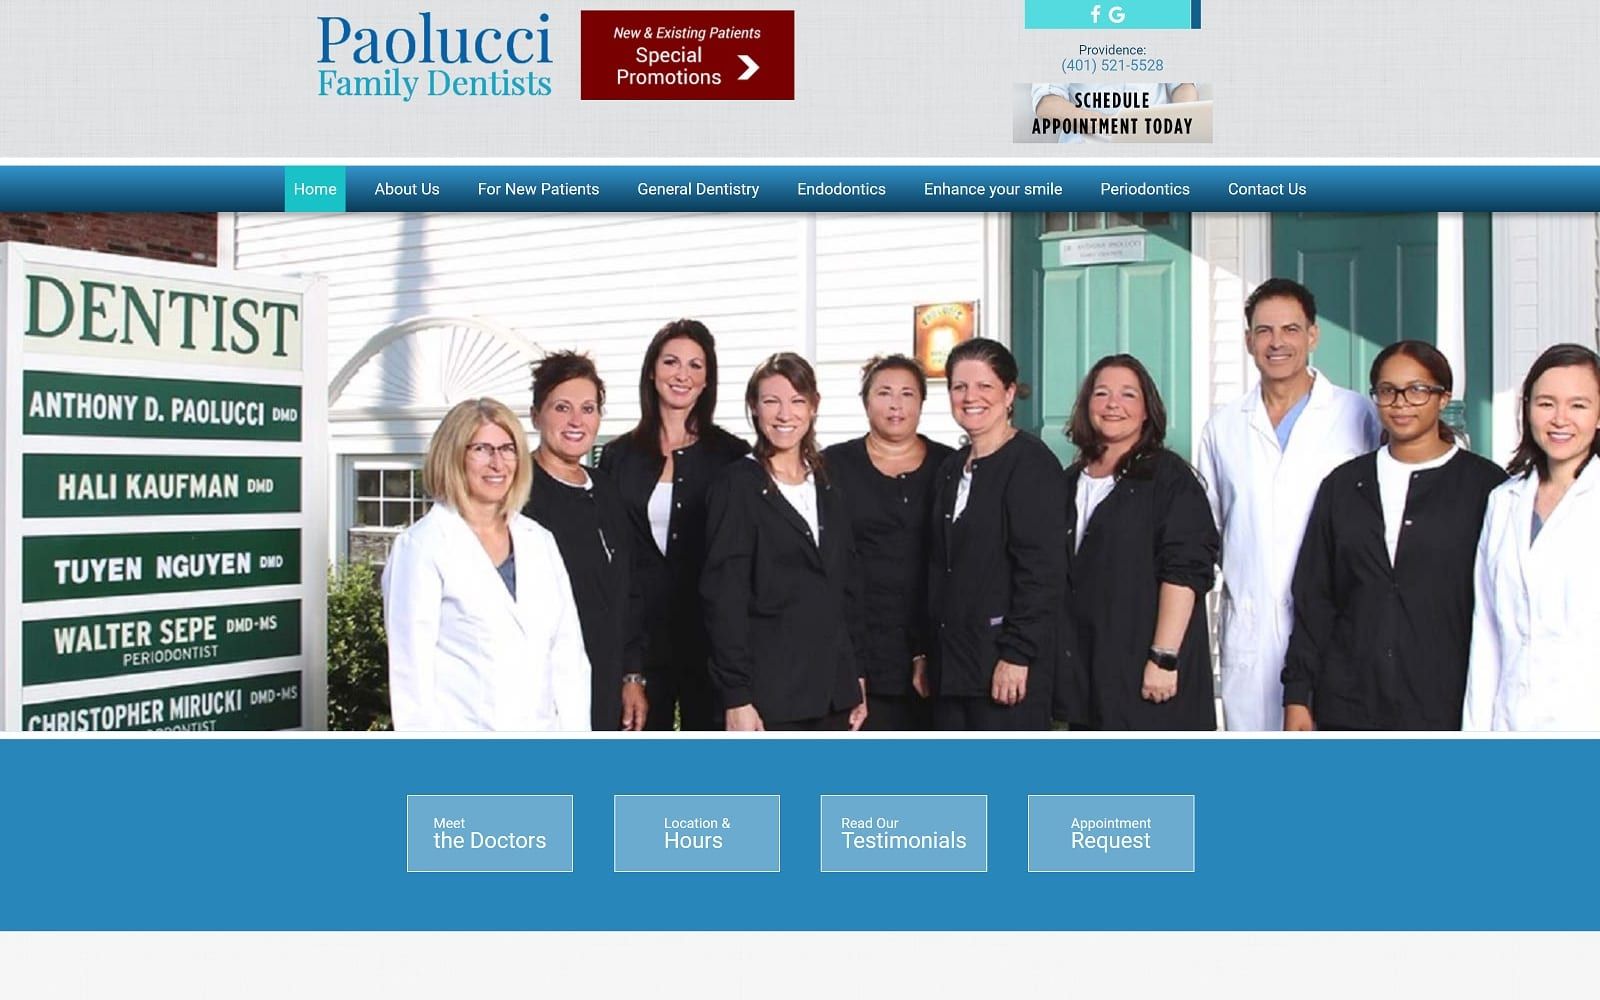 The screenshot of paolucci family dentists paoluccifamilydentists. Com website